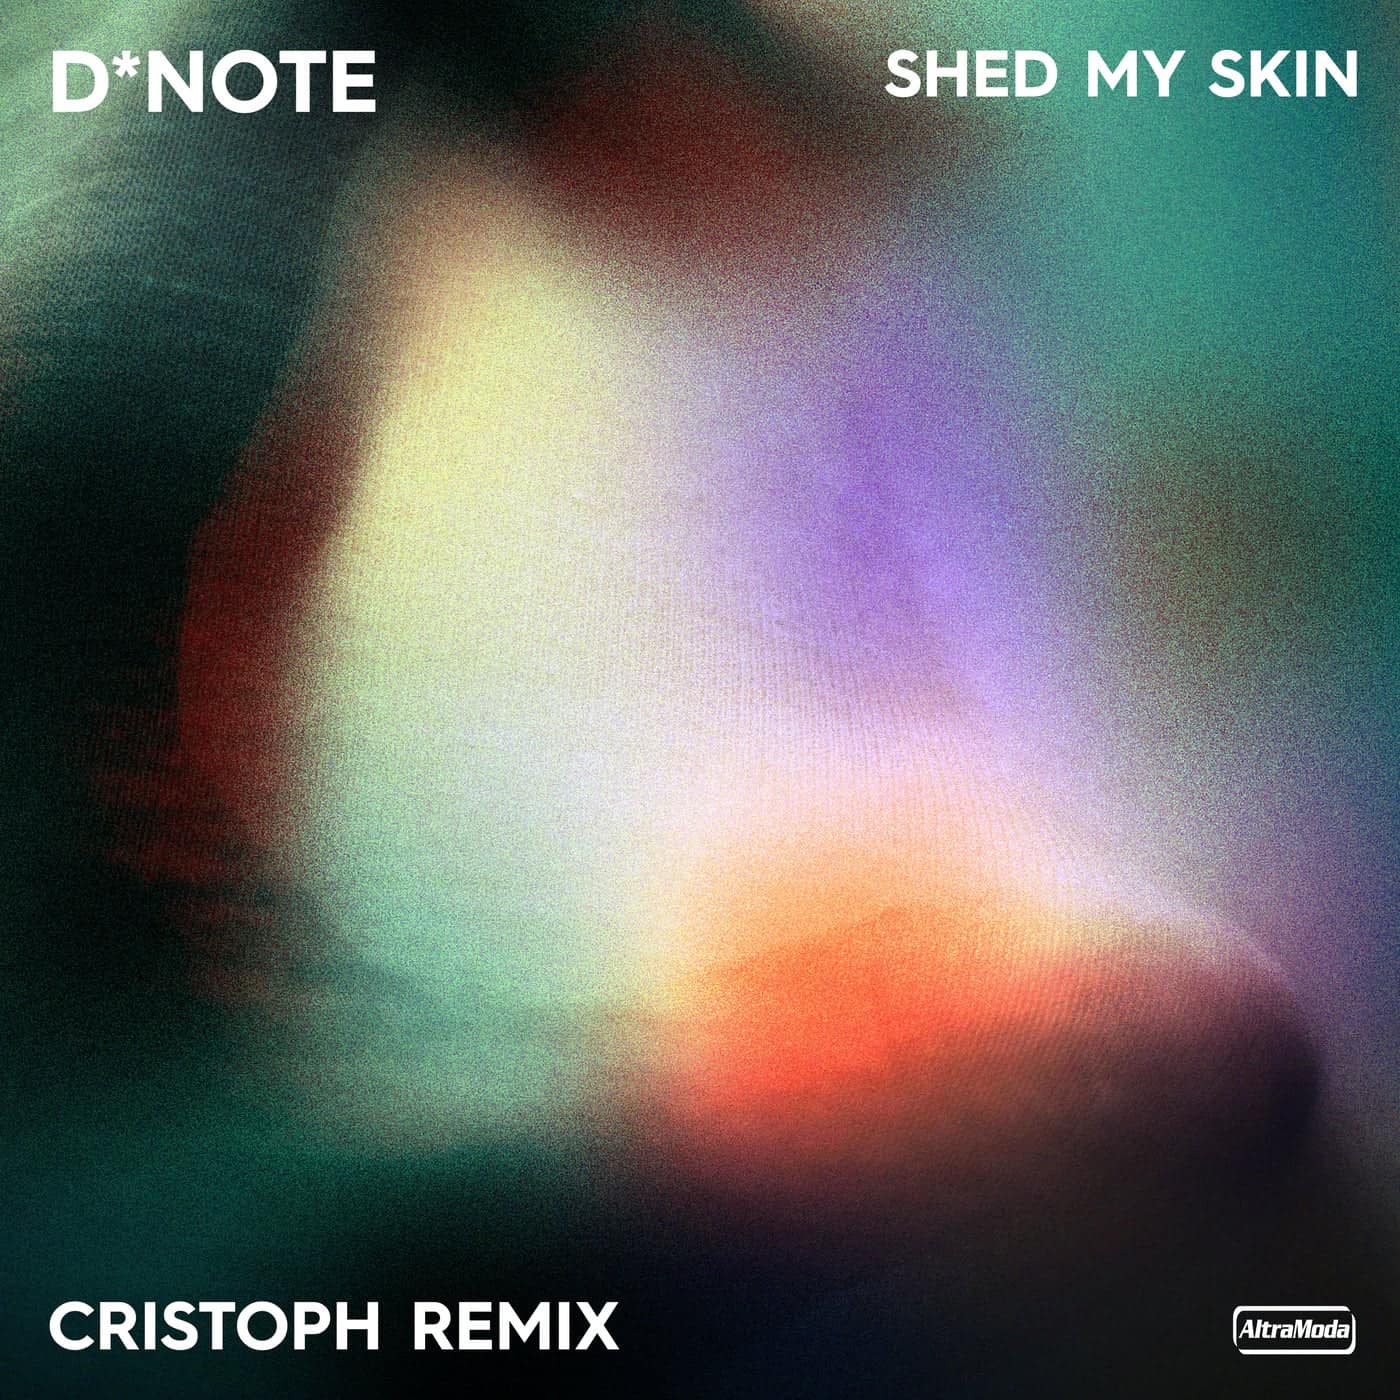 image cover: D*Note - Shed My Skin - Cristoph Remix / AMM691